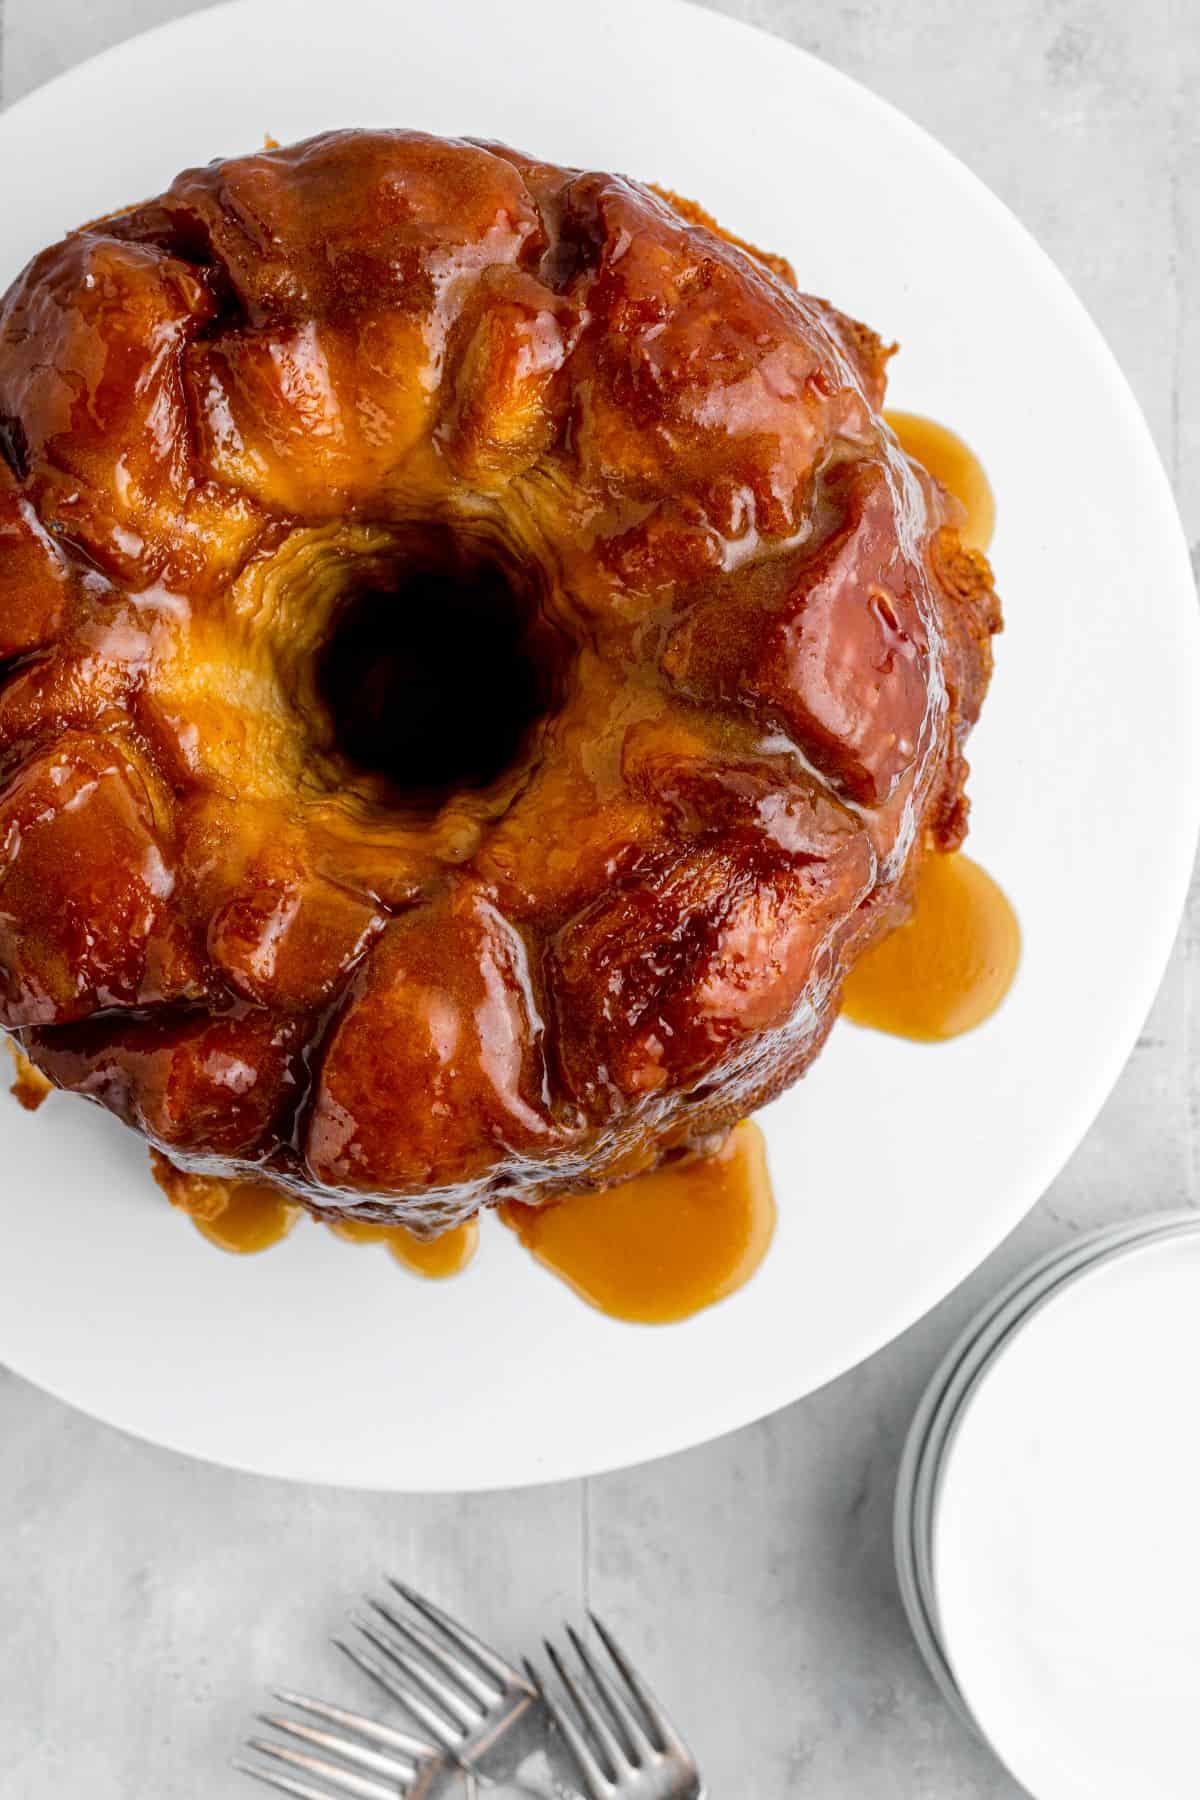 A shot of the ring-shaped monkey bread bake from above.